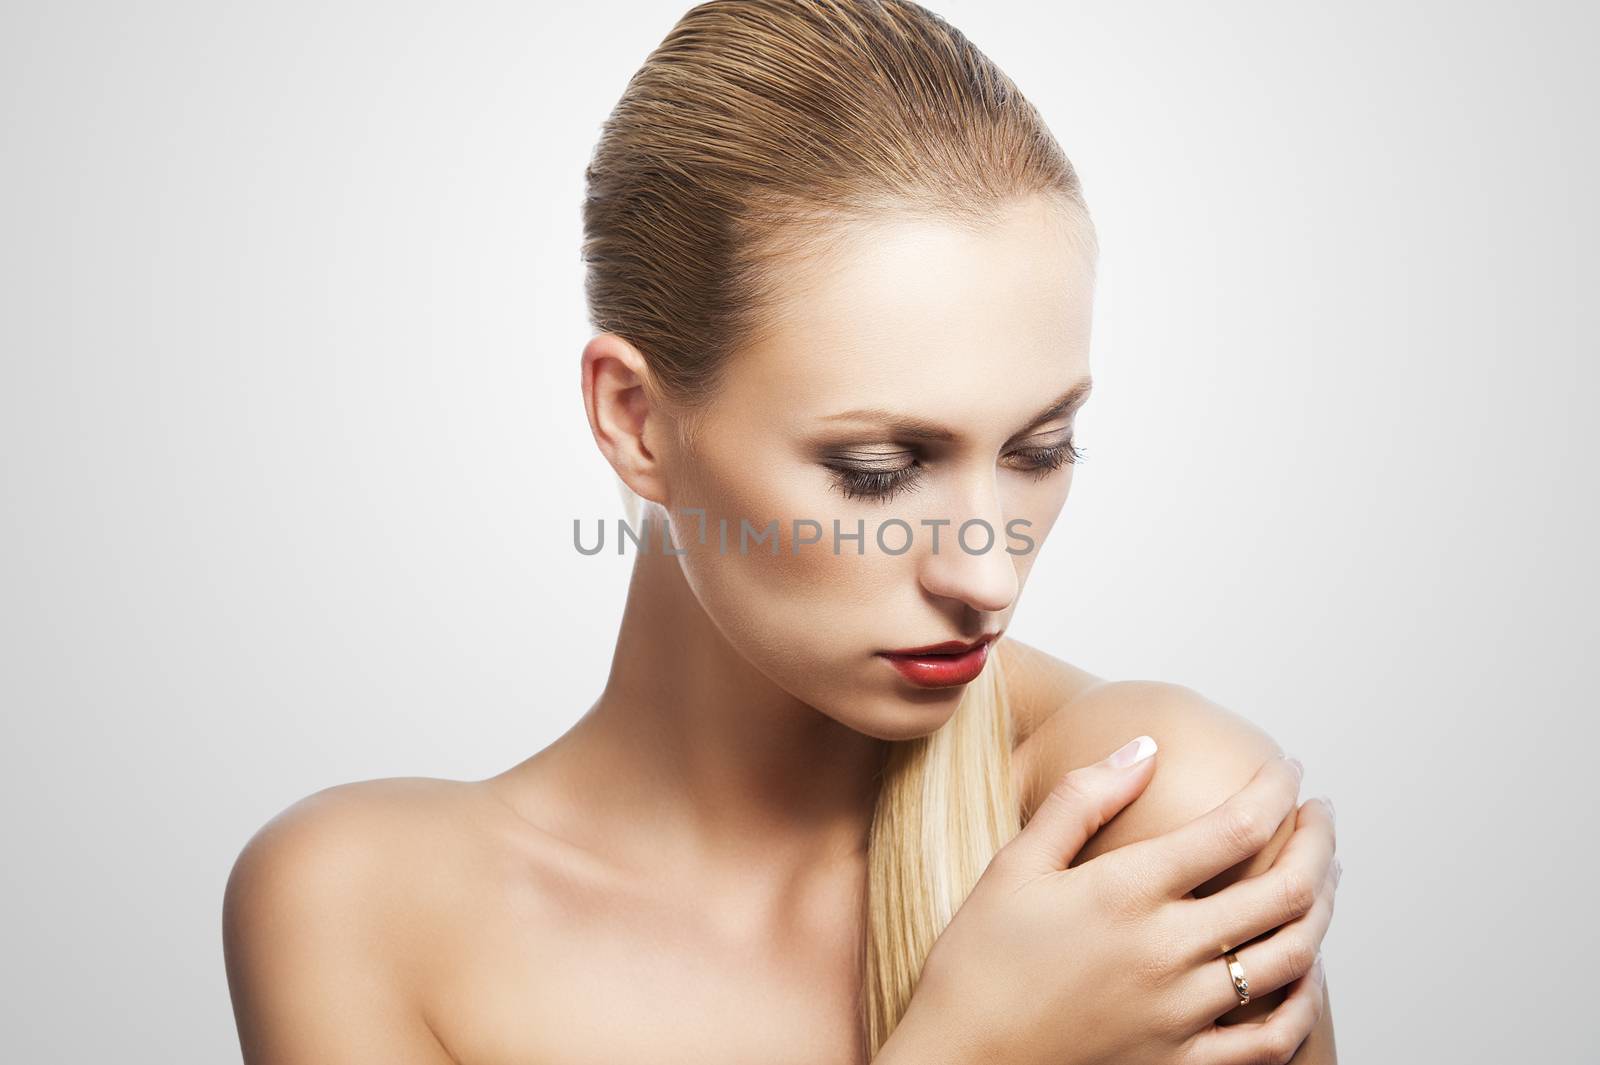 blond pretty woman in a beauty portrait with wet hair and a straight tail over shoulder. She looks down at left, the tail is over the left shoulder and she has a right hand on that.